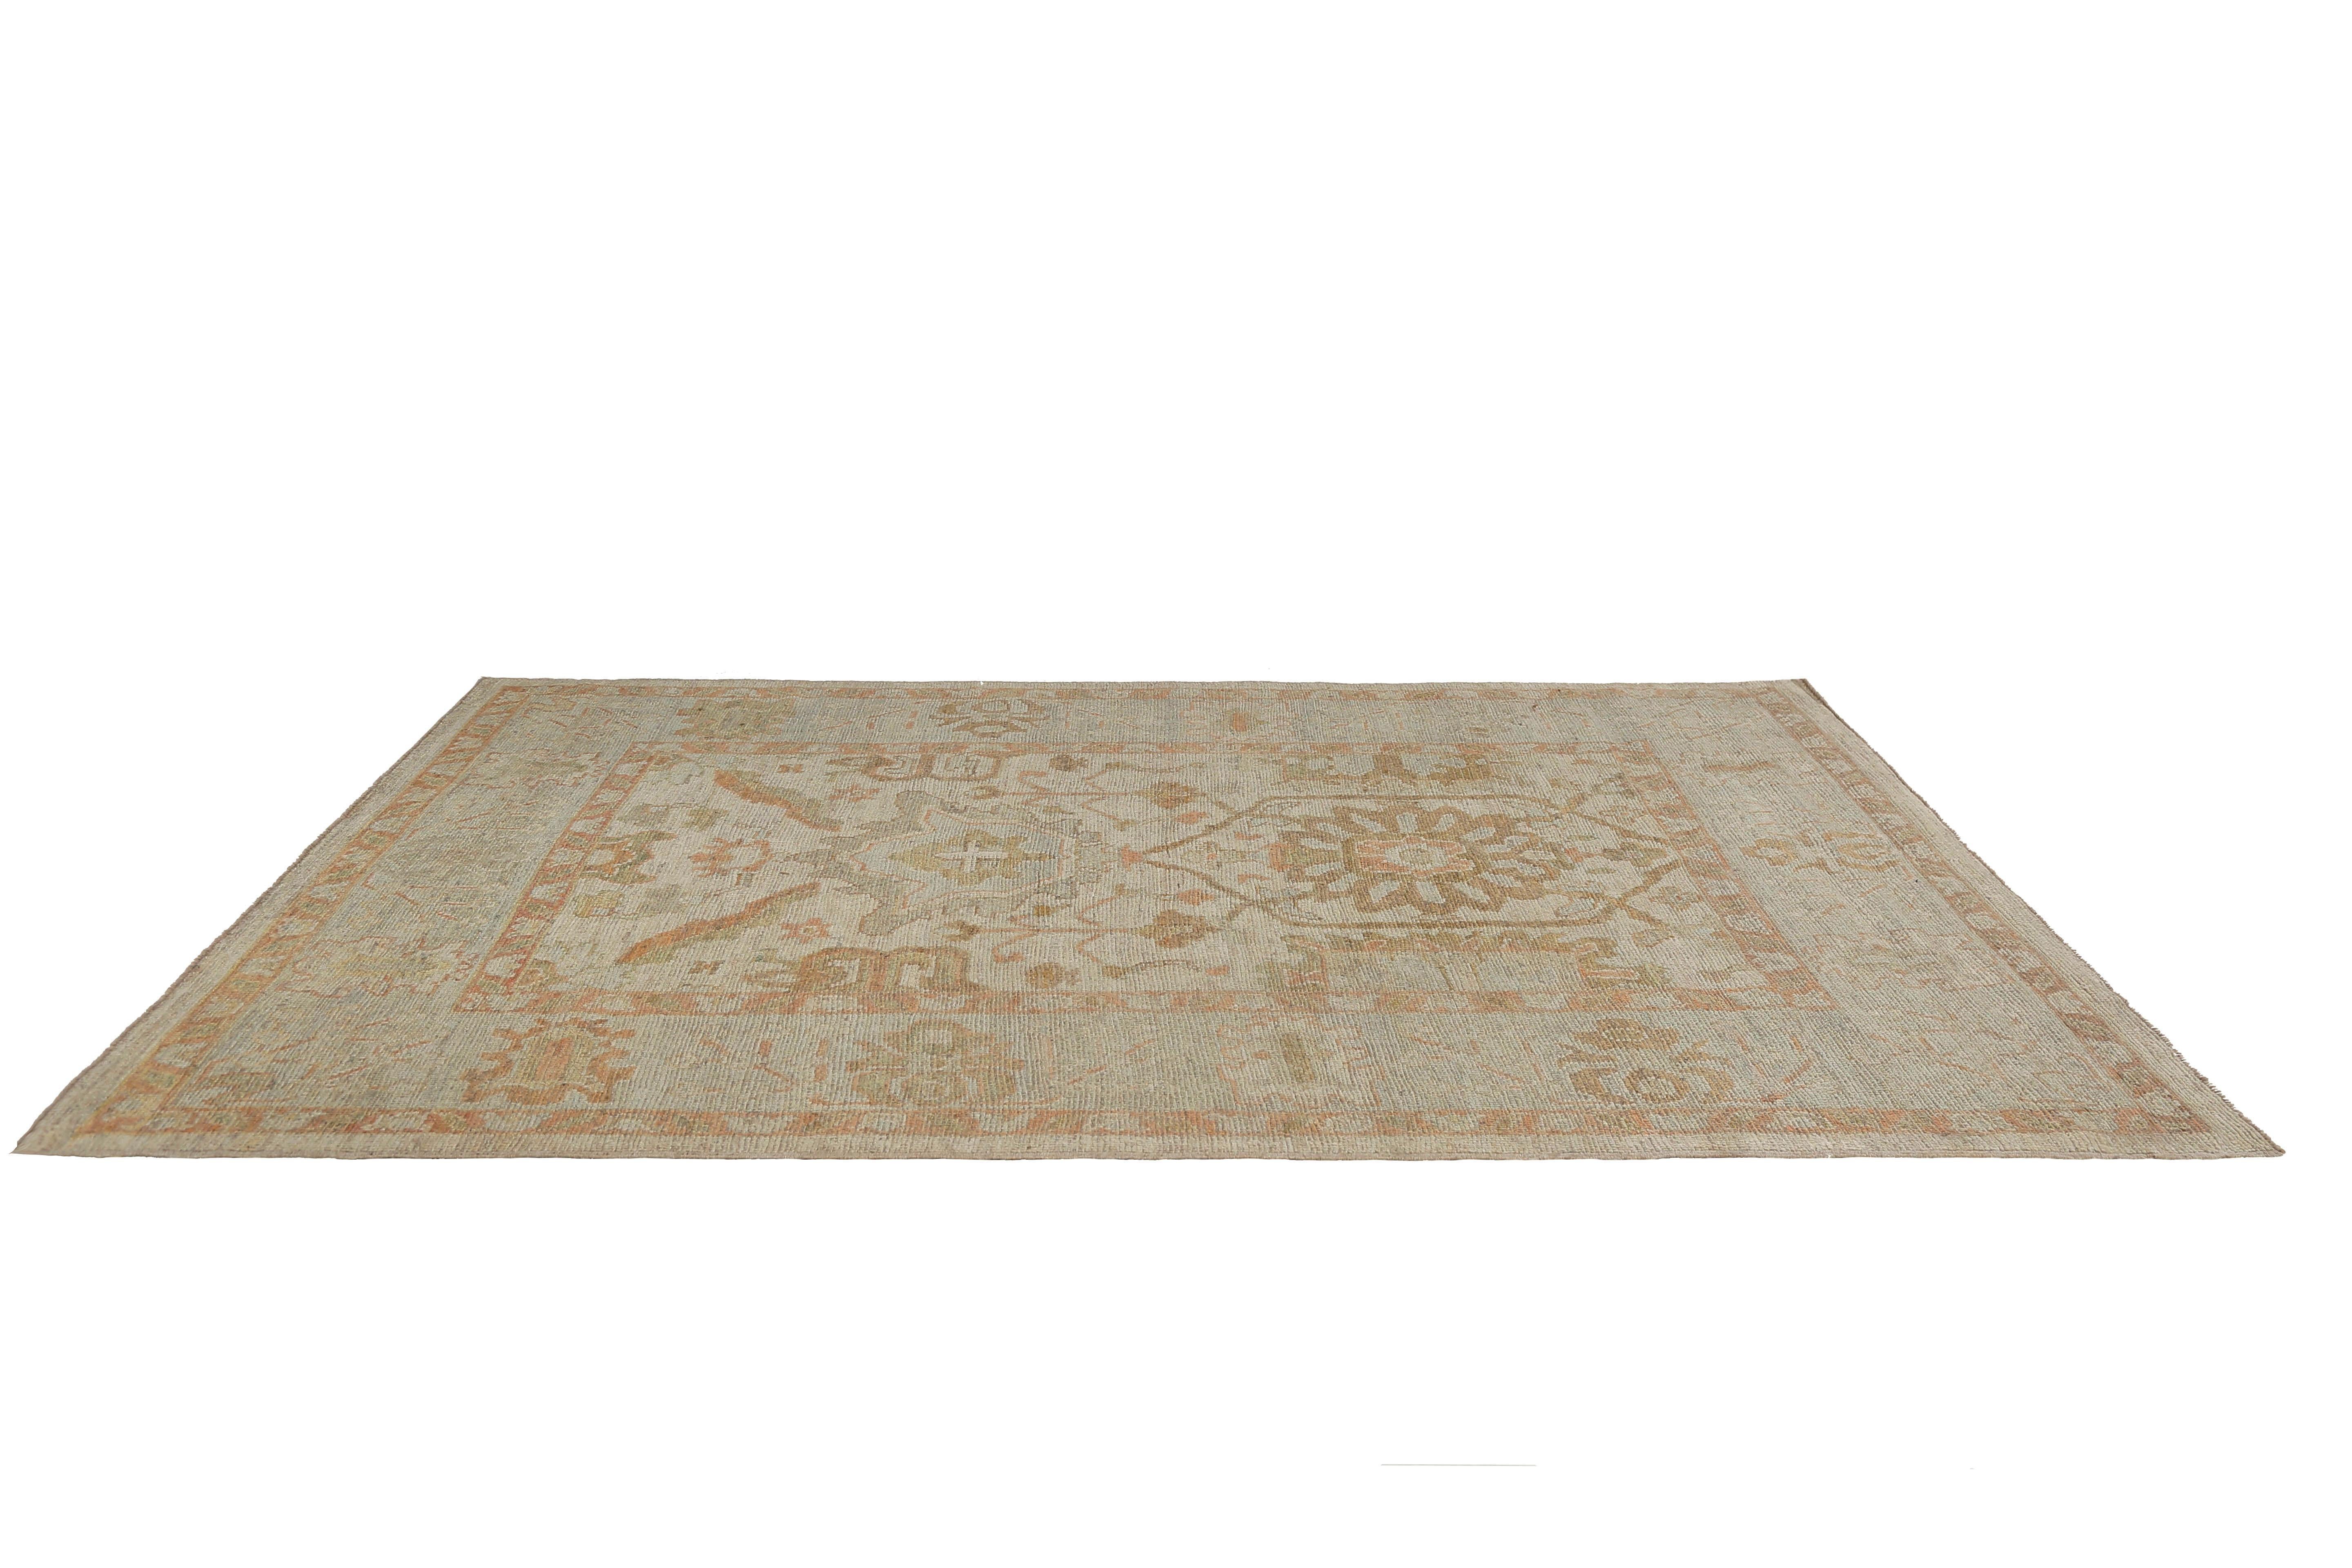 Introducing our stunning handmade Turkish Oushak rug, measuring 6'8'' x 9'9''. This exquisite rug features a beautiful beige background adorned with muted pastel colors including blue, orange, and yellow. Each rug is carefully crafted by skilled